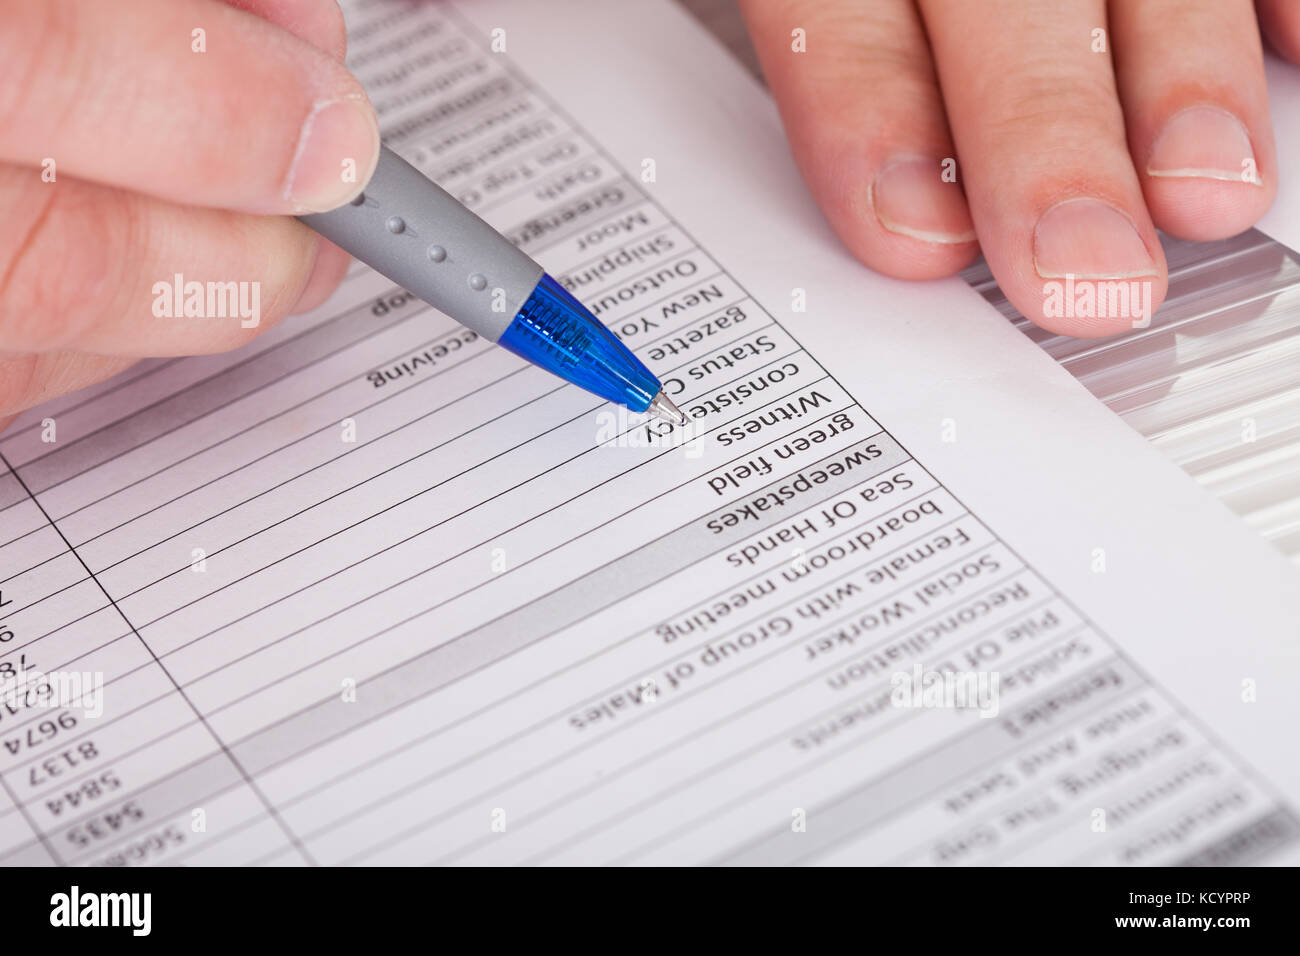 Close-up Photo Of Person Filling Application Form Stock Photo